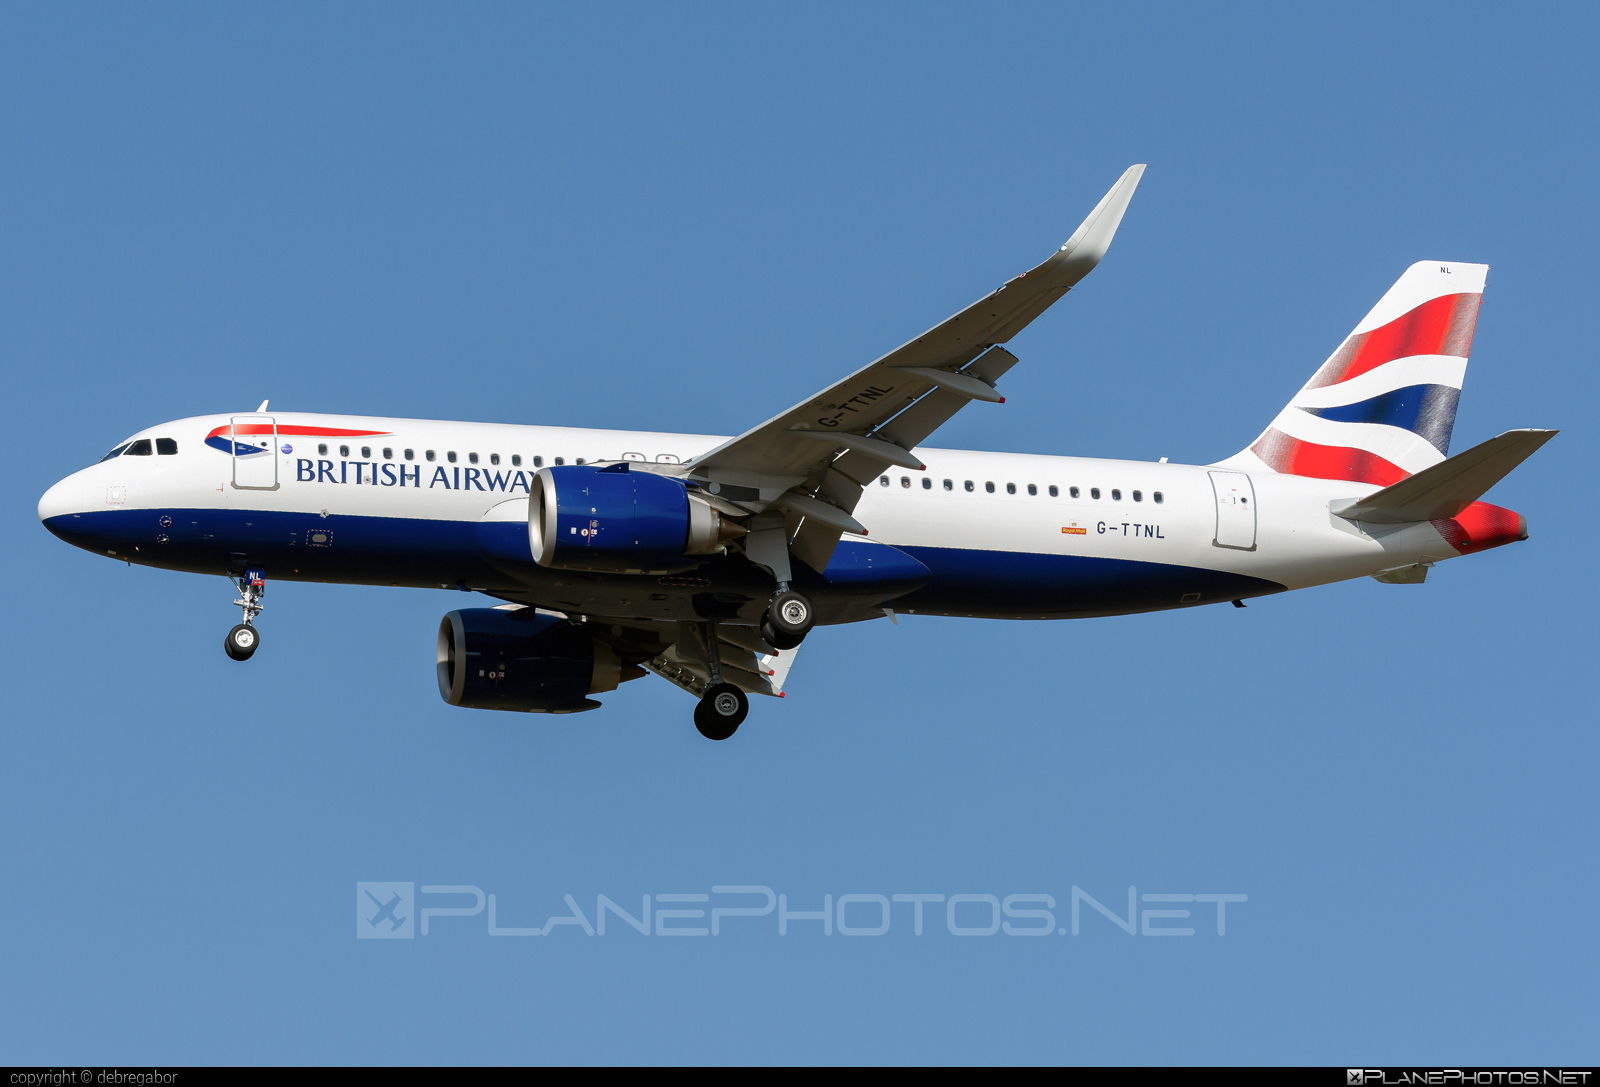 Airbus A320-251N - G-TTNL operated by British Airways #a320 #a320family #a320neo #airbus #airbus320 #britishairways